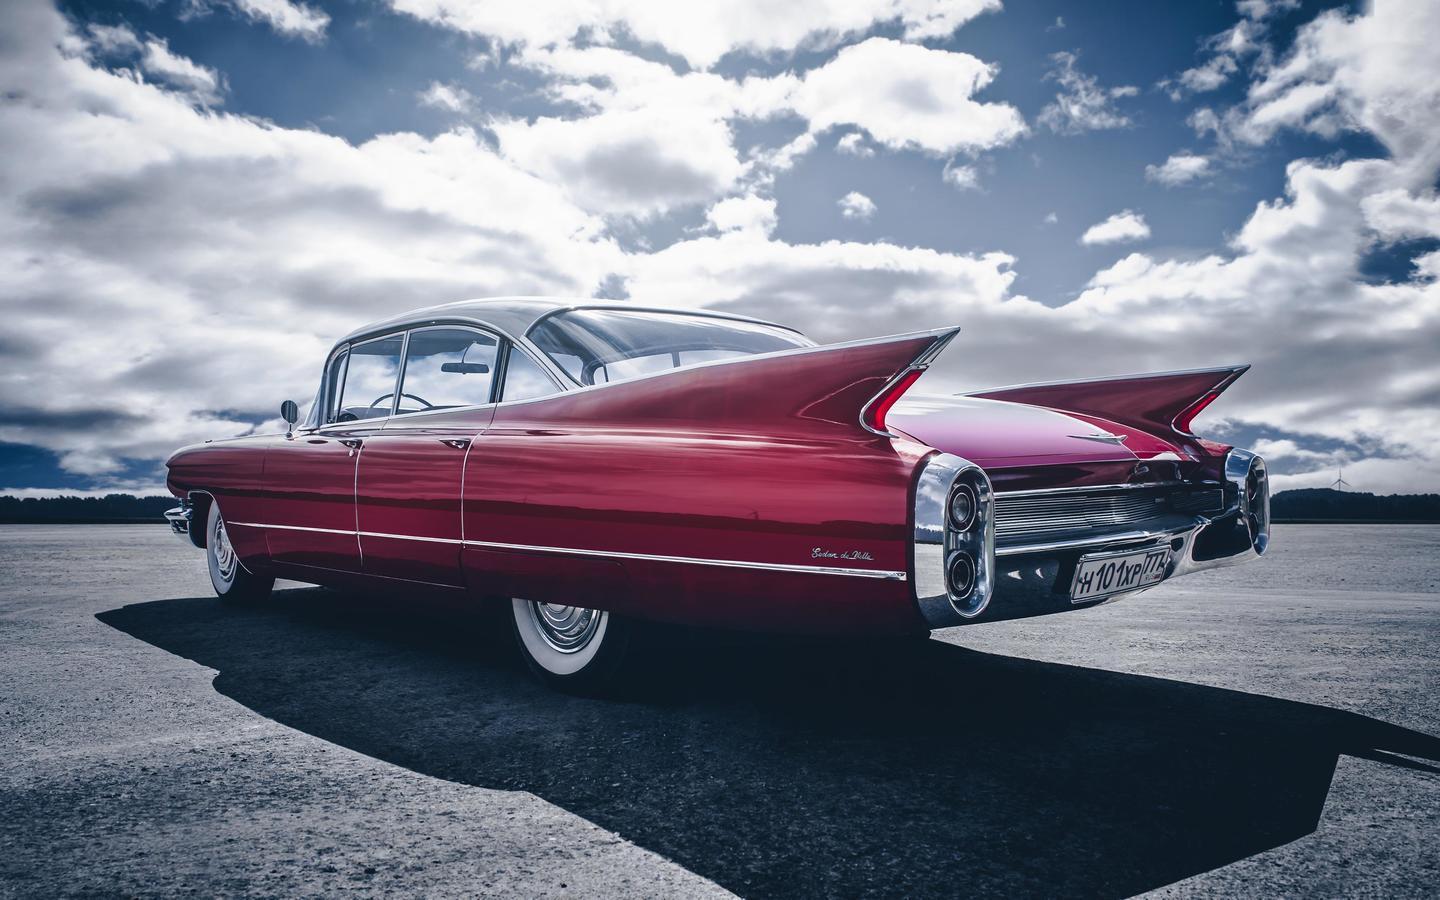 Vintage Cadillac Wallpapers Top Free Vintage Cadillac Backgrounds Wallpaperaccess